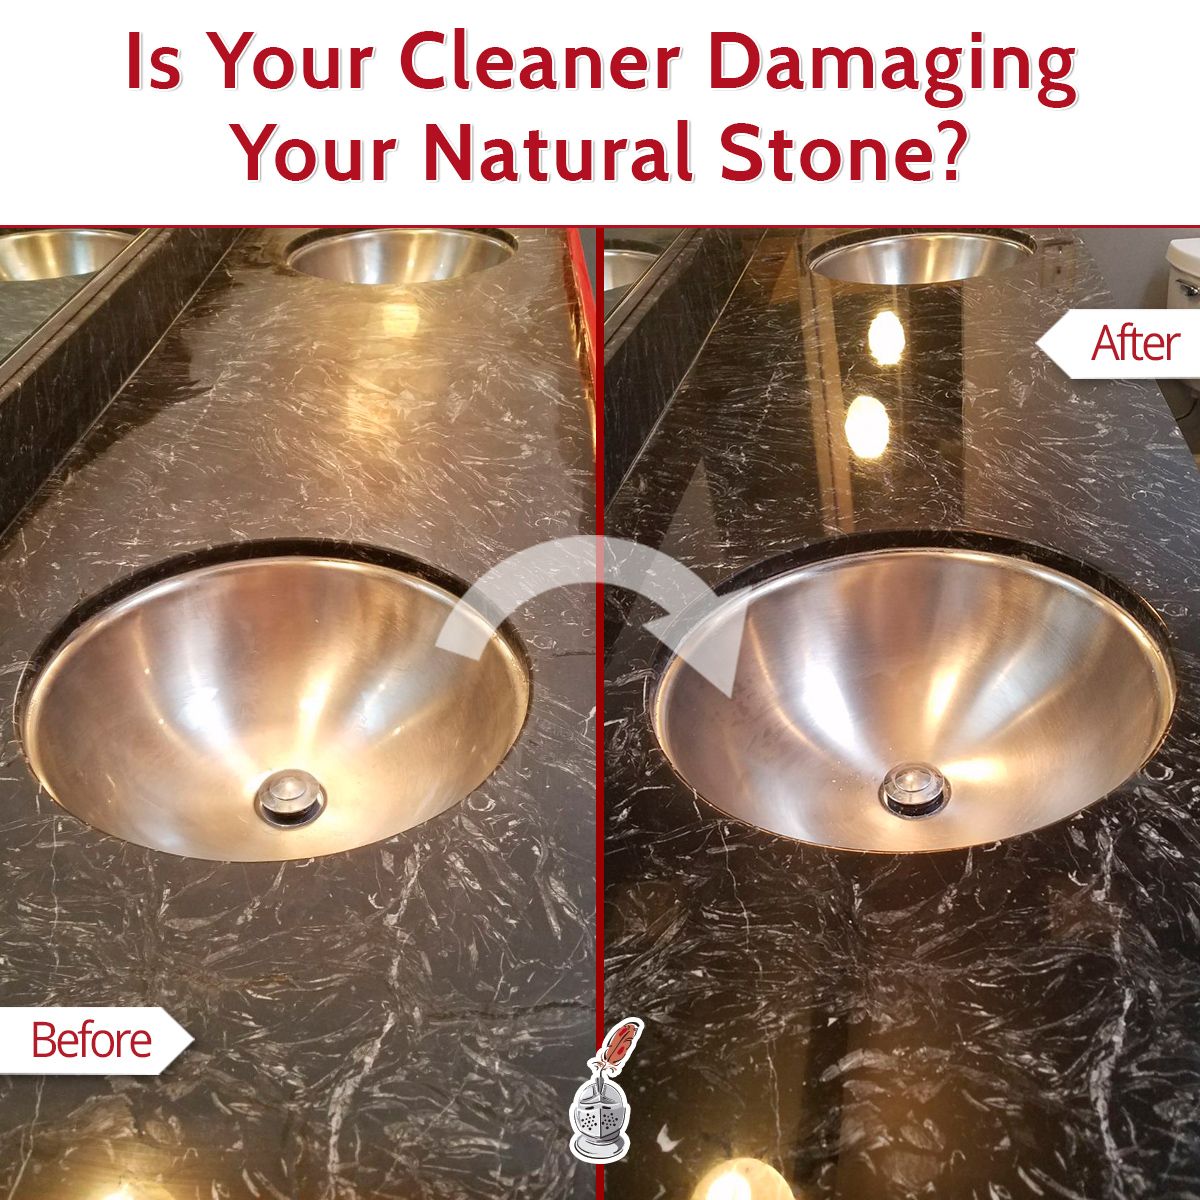 Is Your Cleaner Damaging Your Natural Stone?